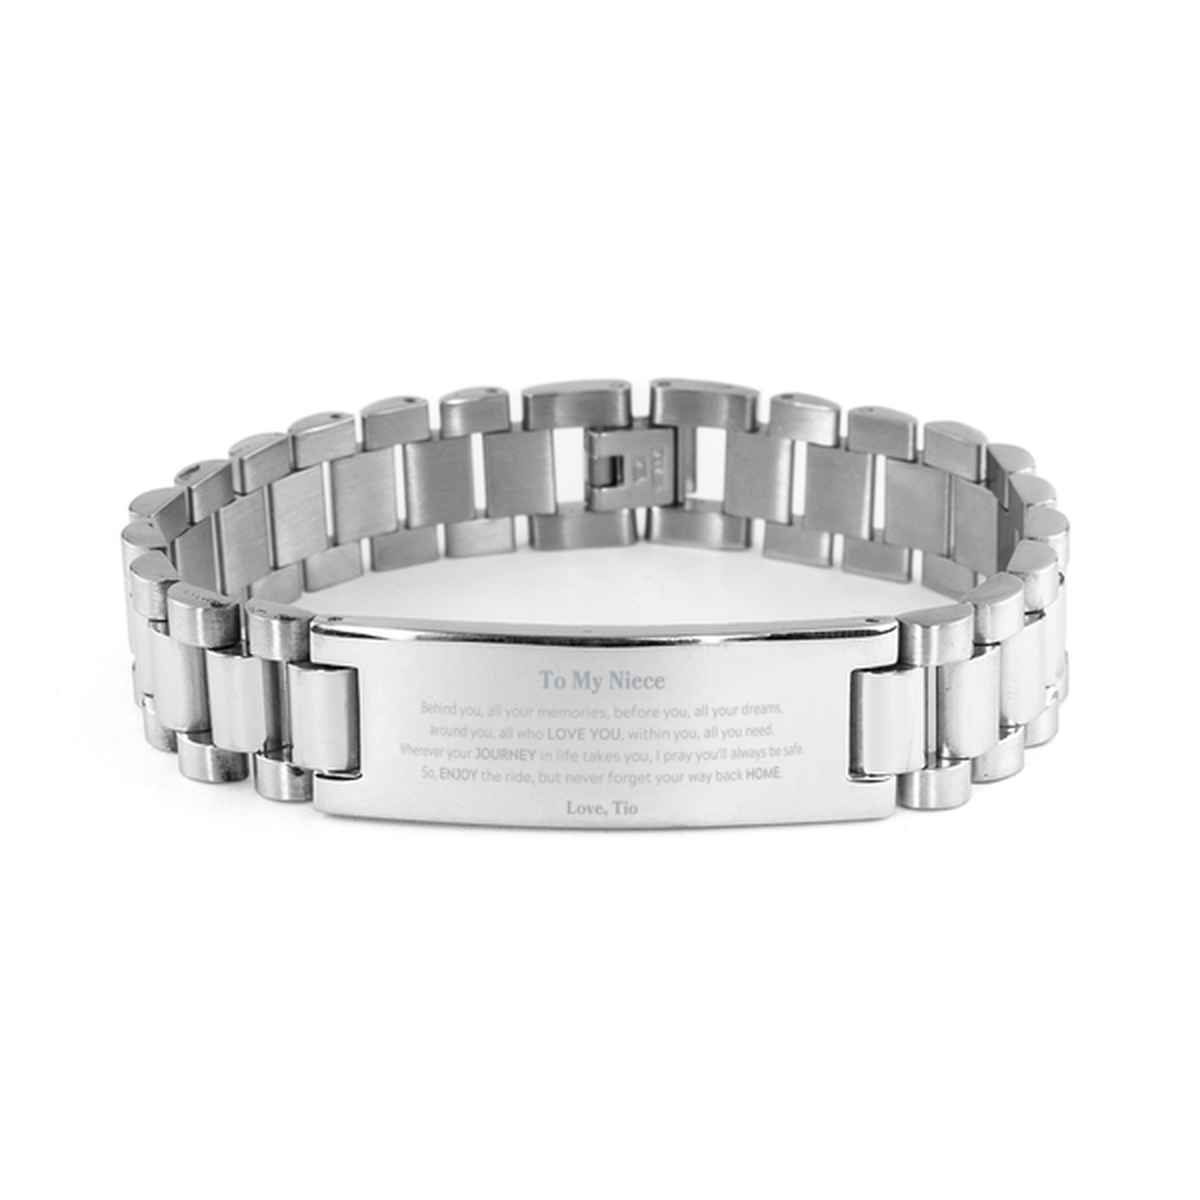 To My Niece Graduation Gifts from Tio, Niece Ladder Stainless Steel Bracelet Christmas Birthday Gifts for Niece Behind you, all your memories, before you, all your dreams. Love, Tio